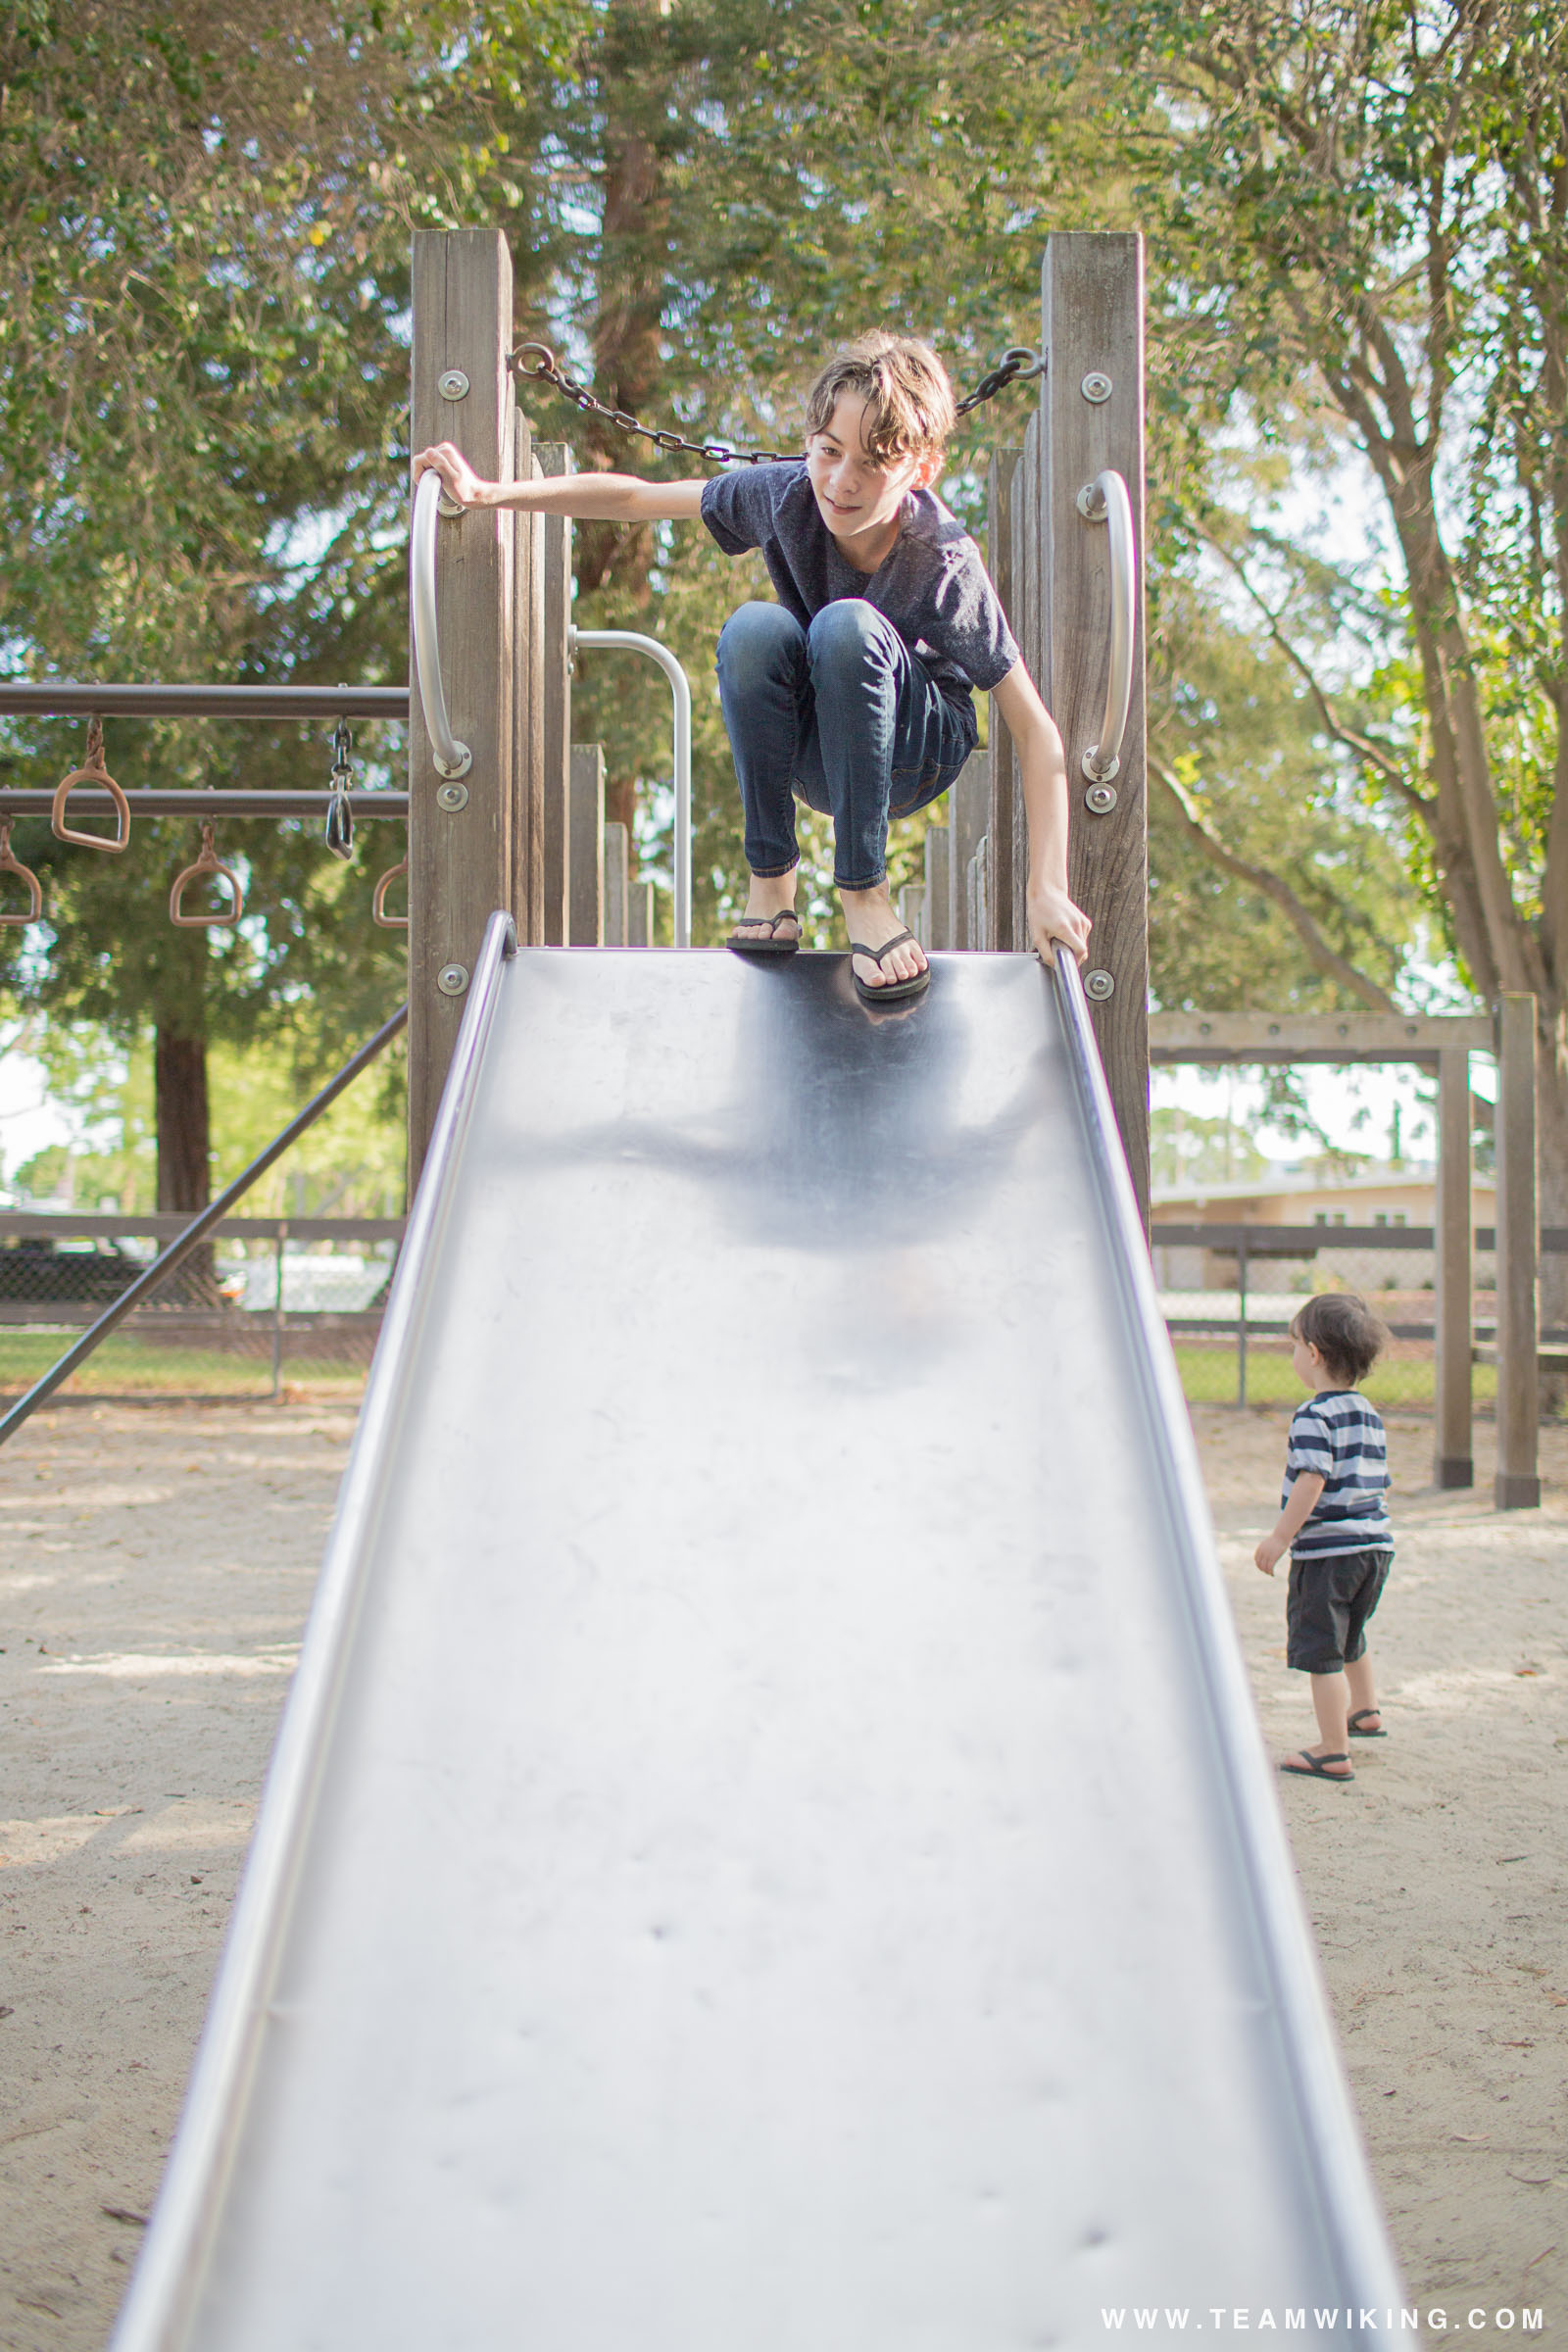 Top 5 San Francisco Bay Area Parks + Playgrounds